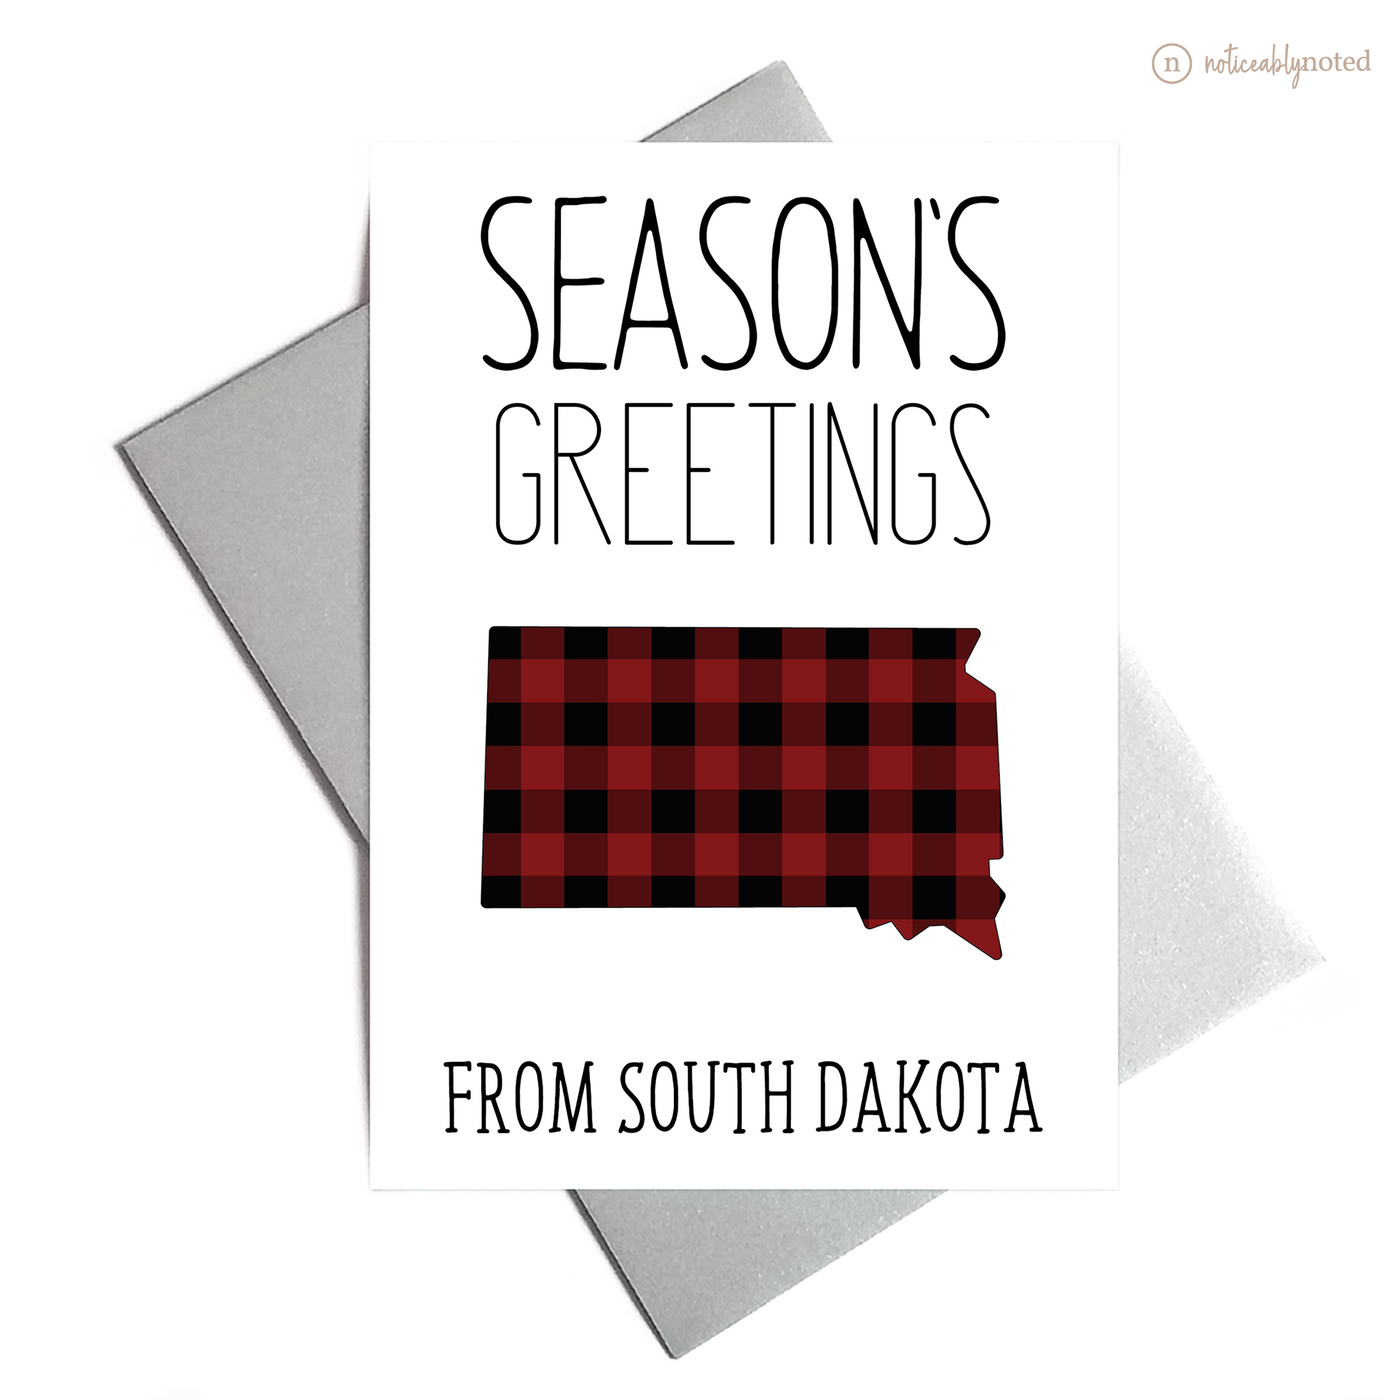 SD Holiday Greeting Cards | Noticeably Noted